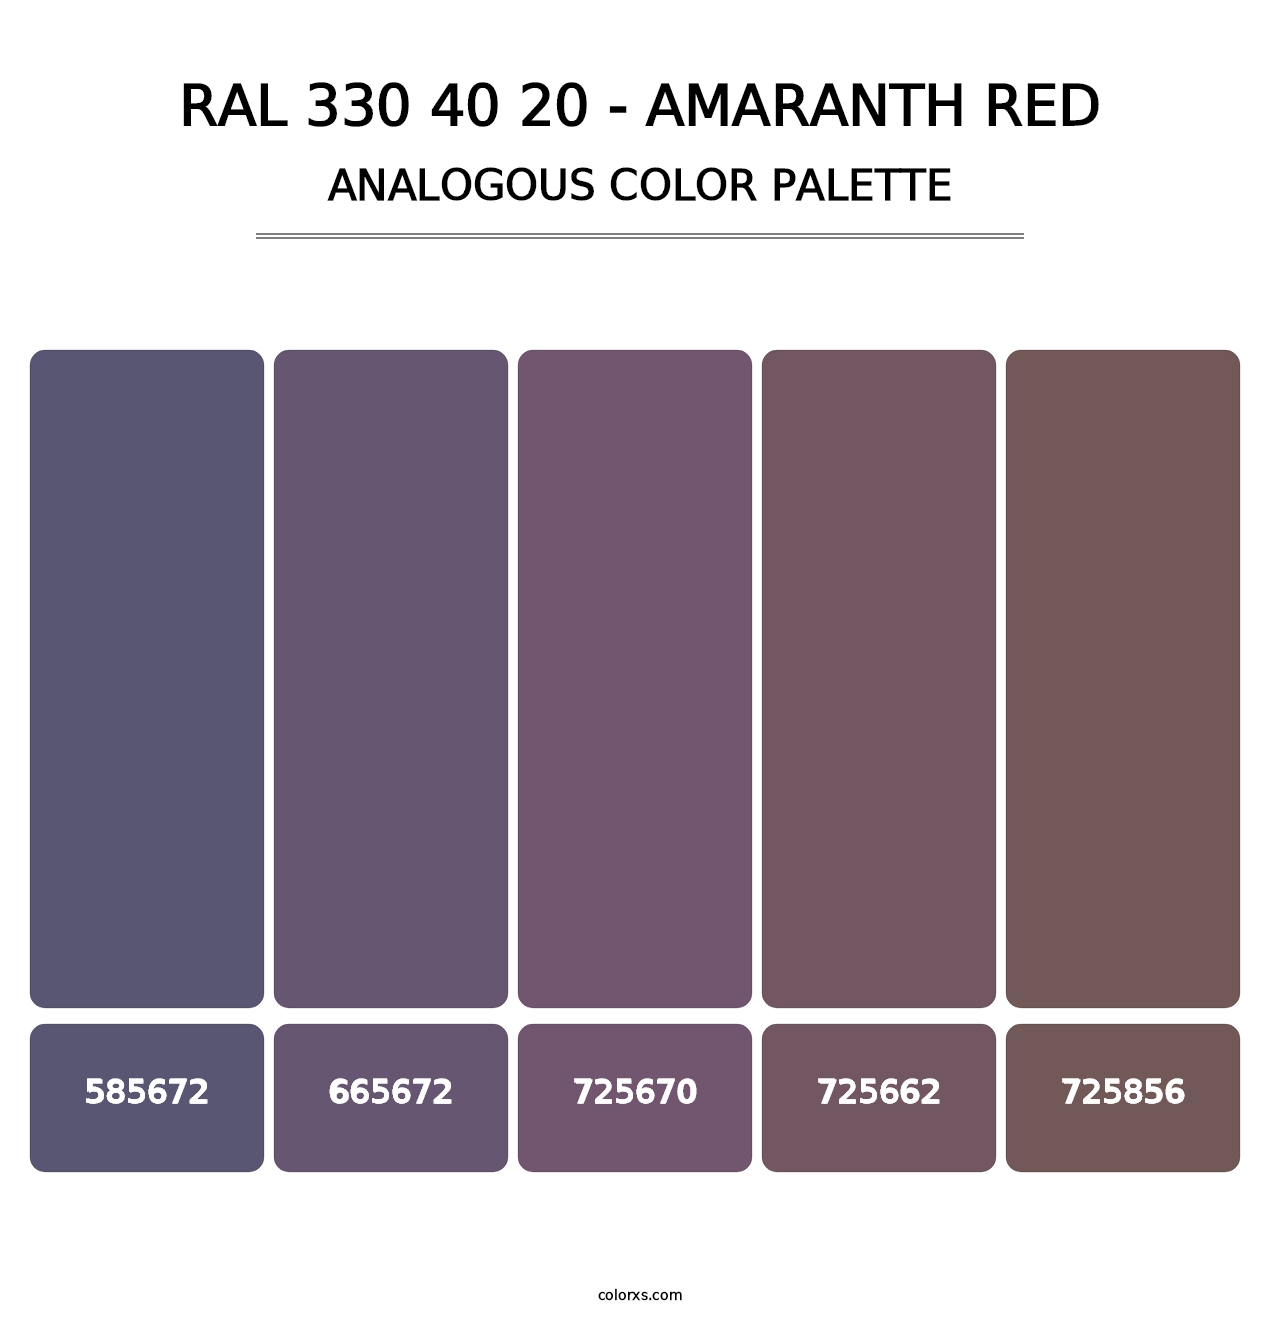 RAL 330 40 20 - Amaranth Red - Analogous Color Palette